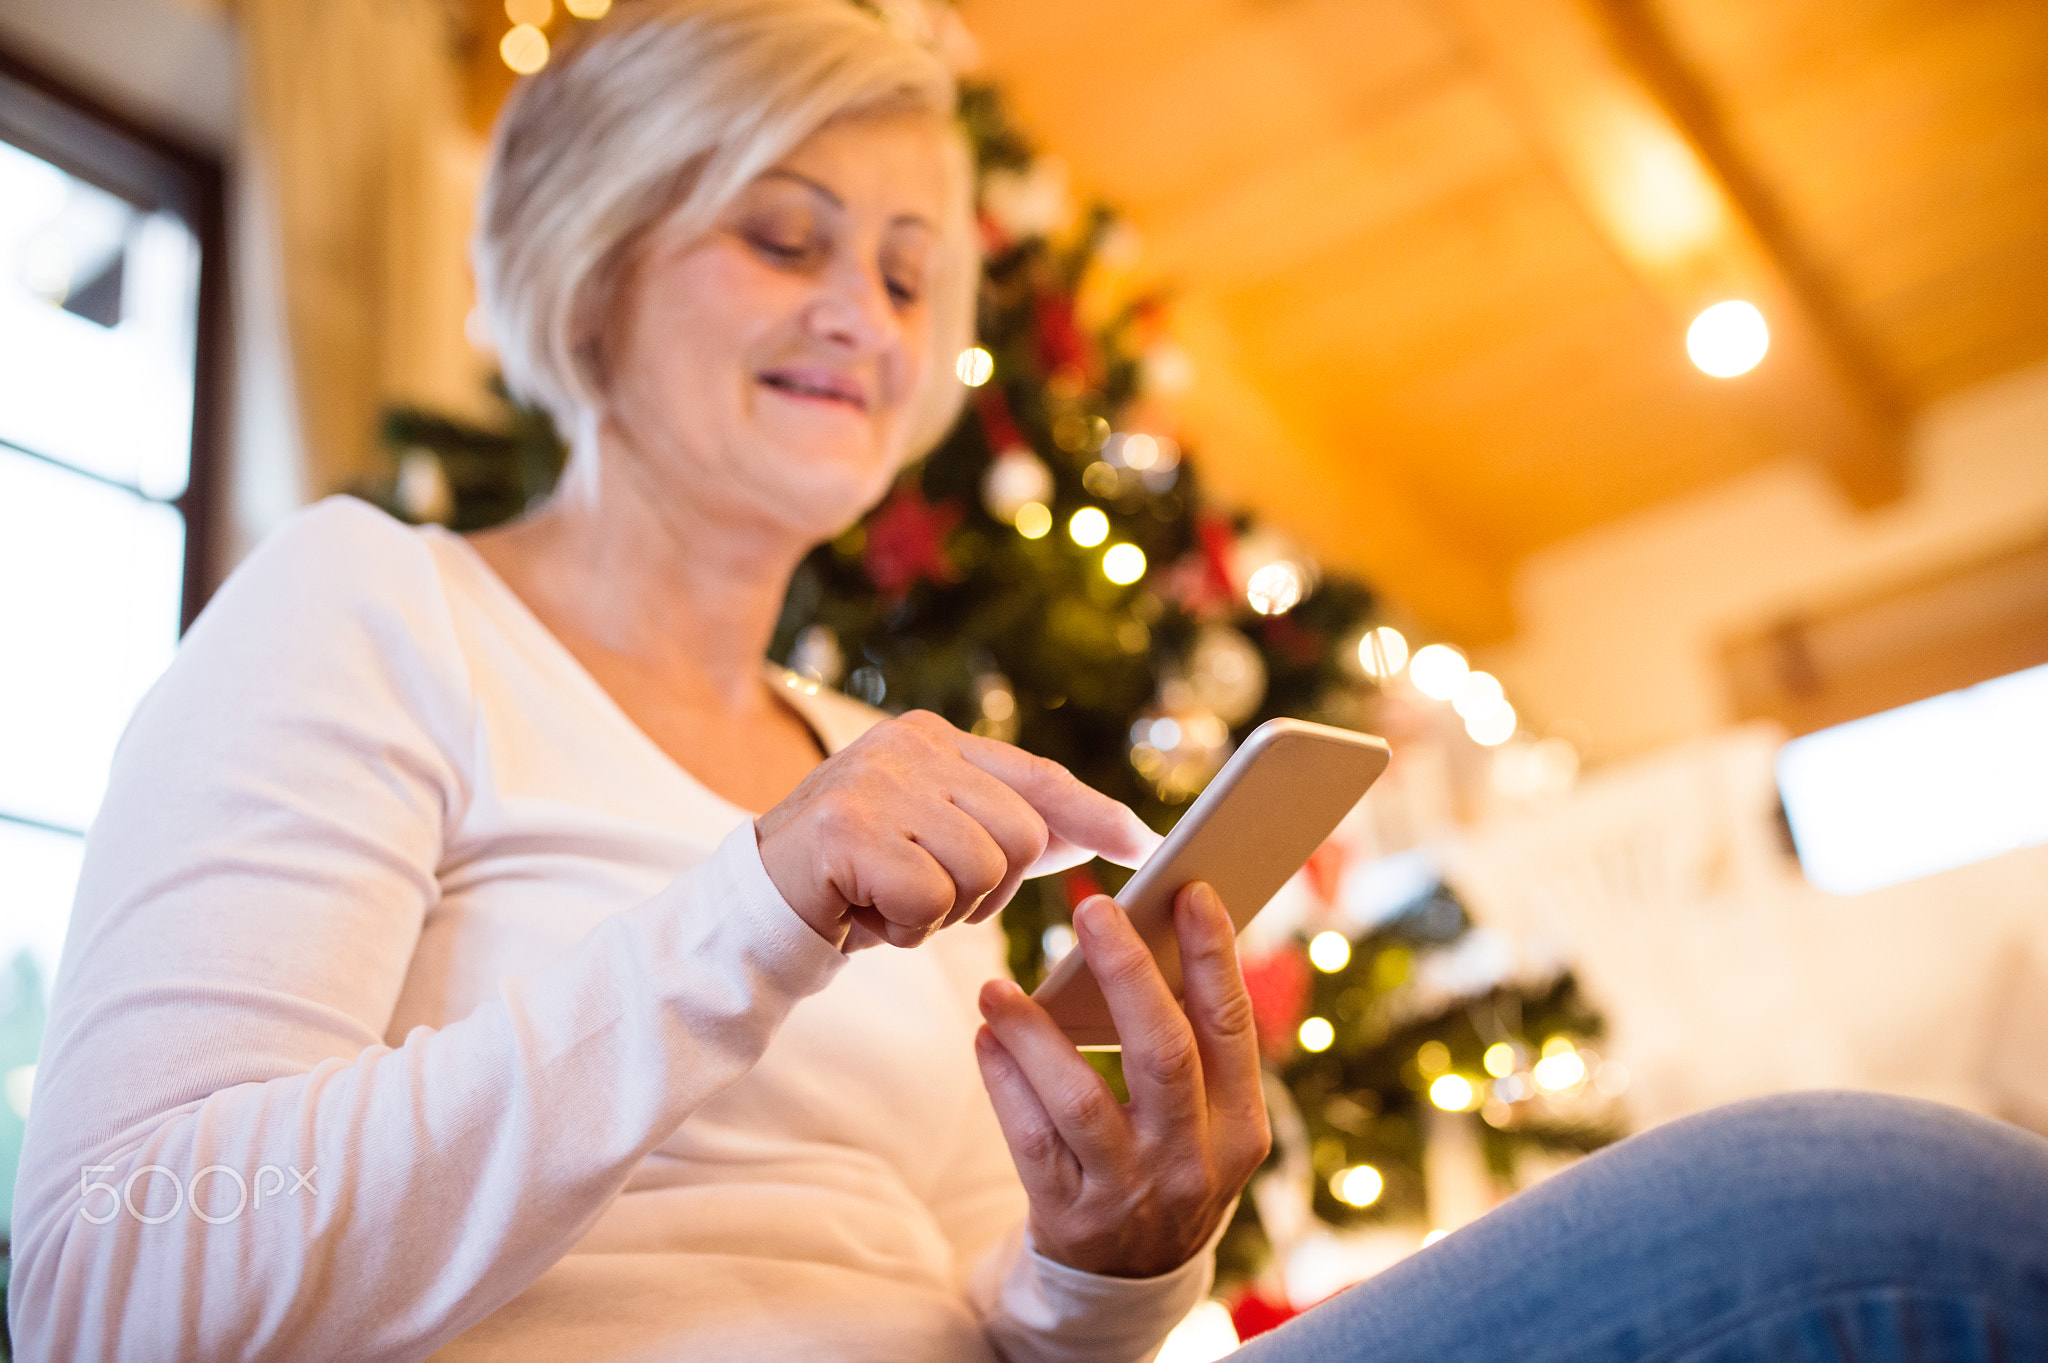 Senior woman with smartphone in front of Christmas tree.